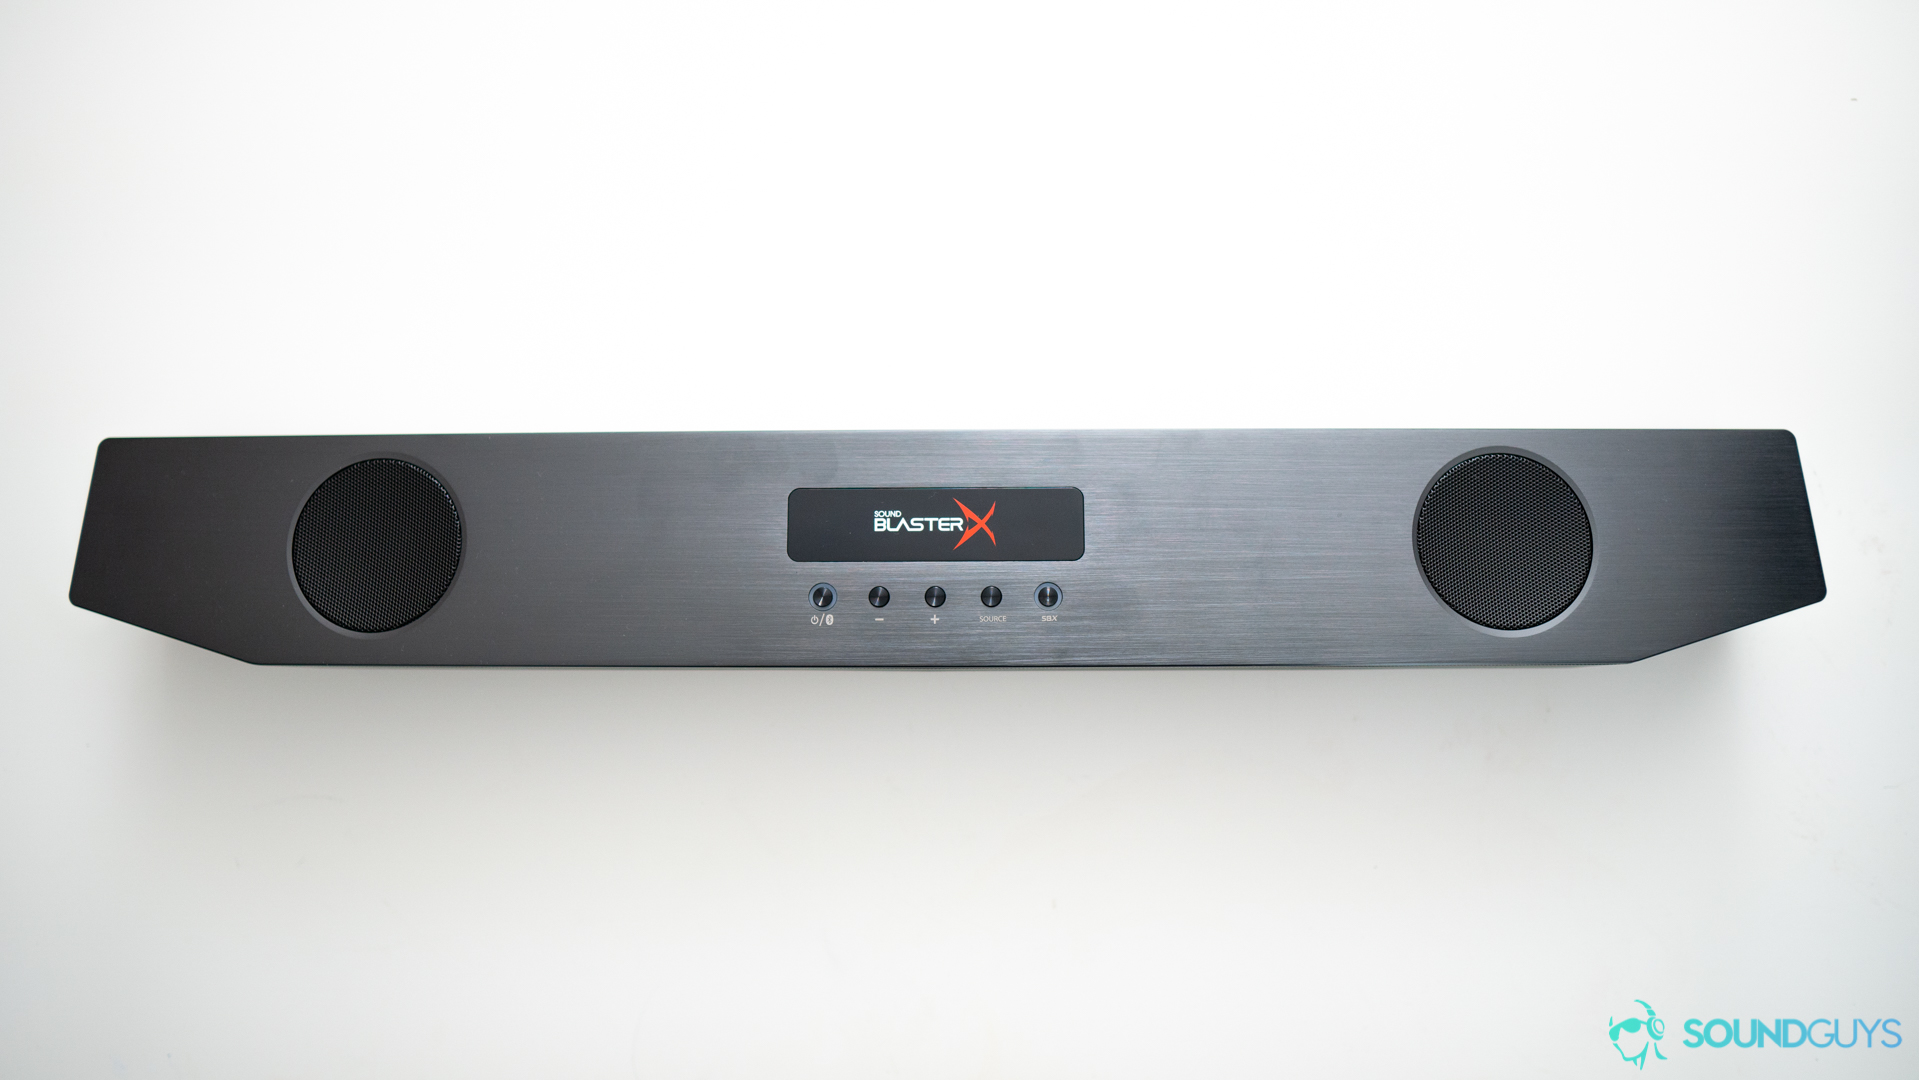 Pictured is the top of the Creative Sound BlasterX Katana.